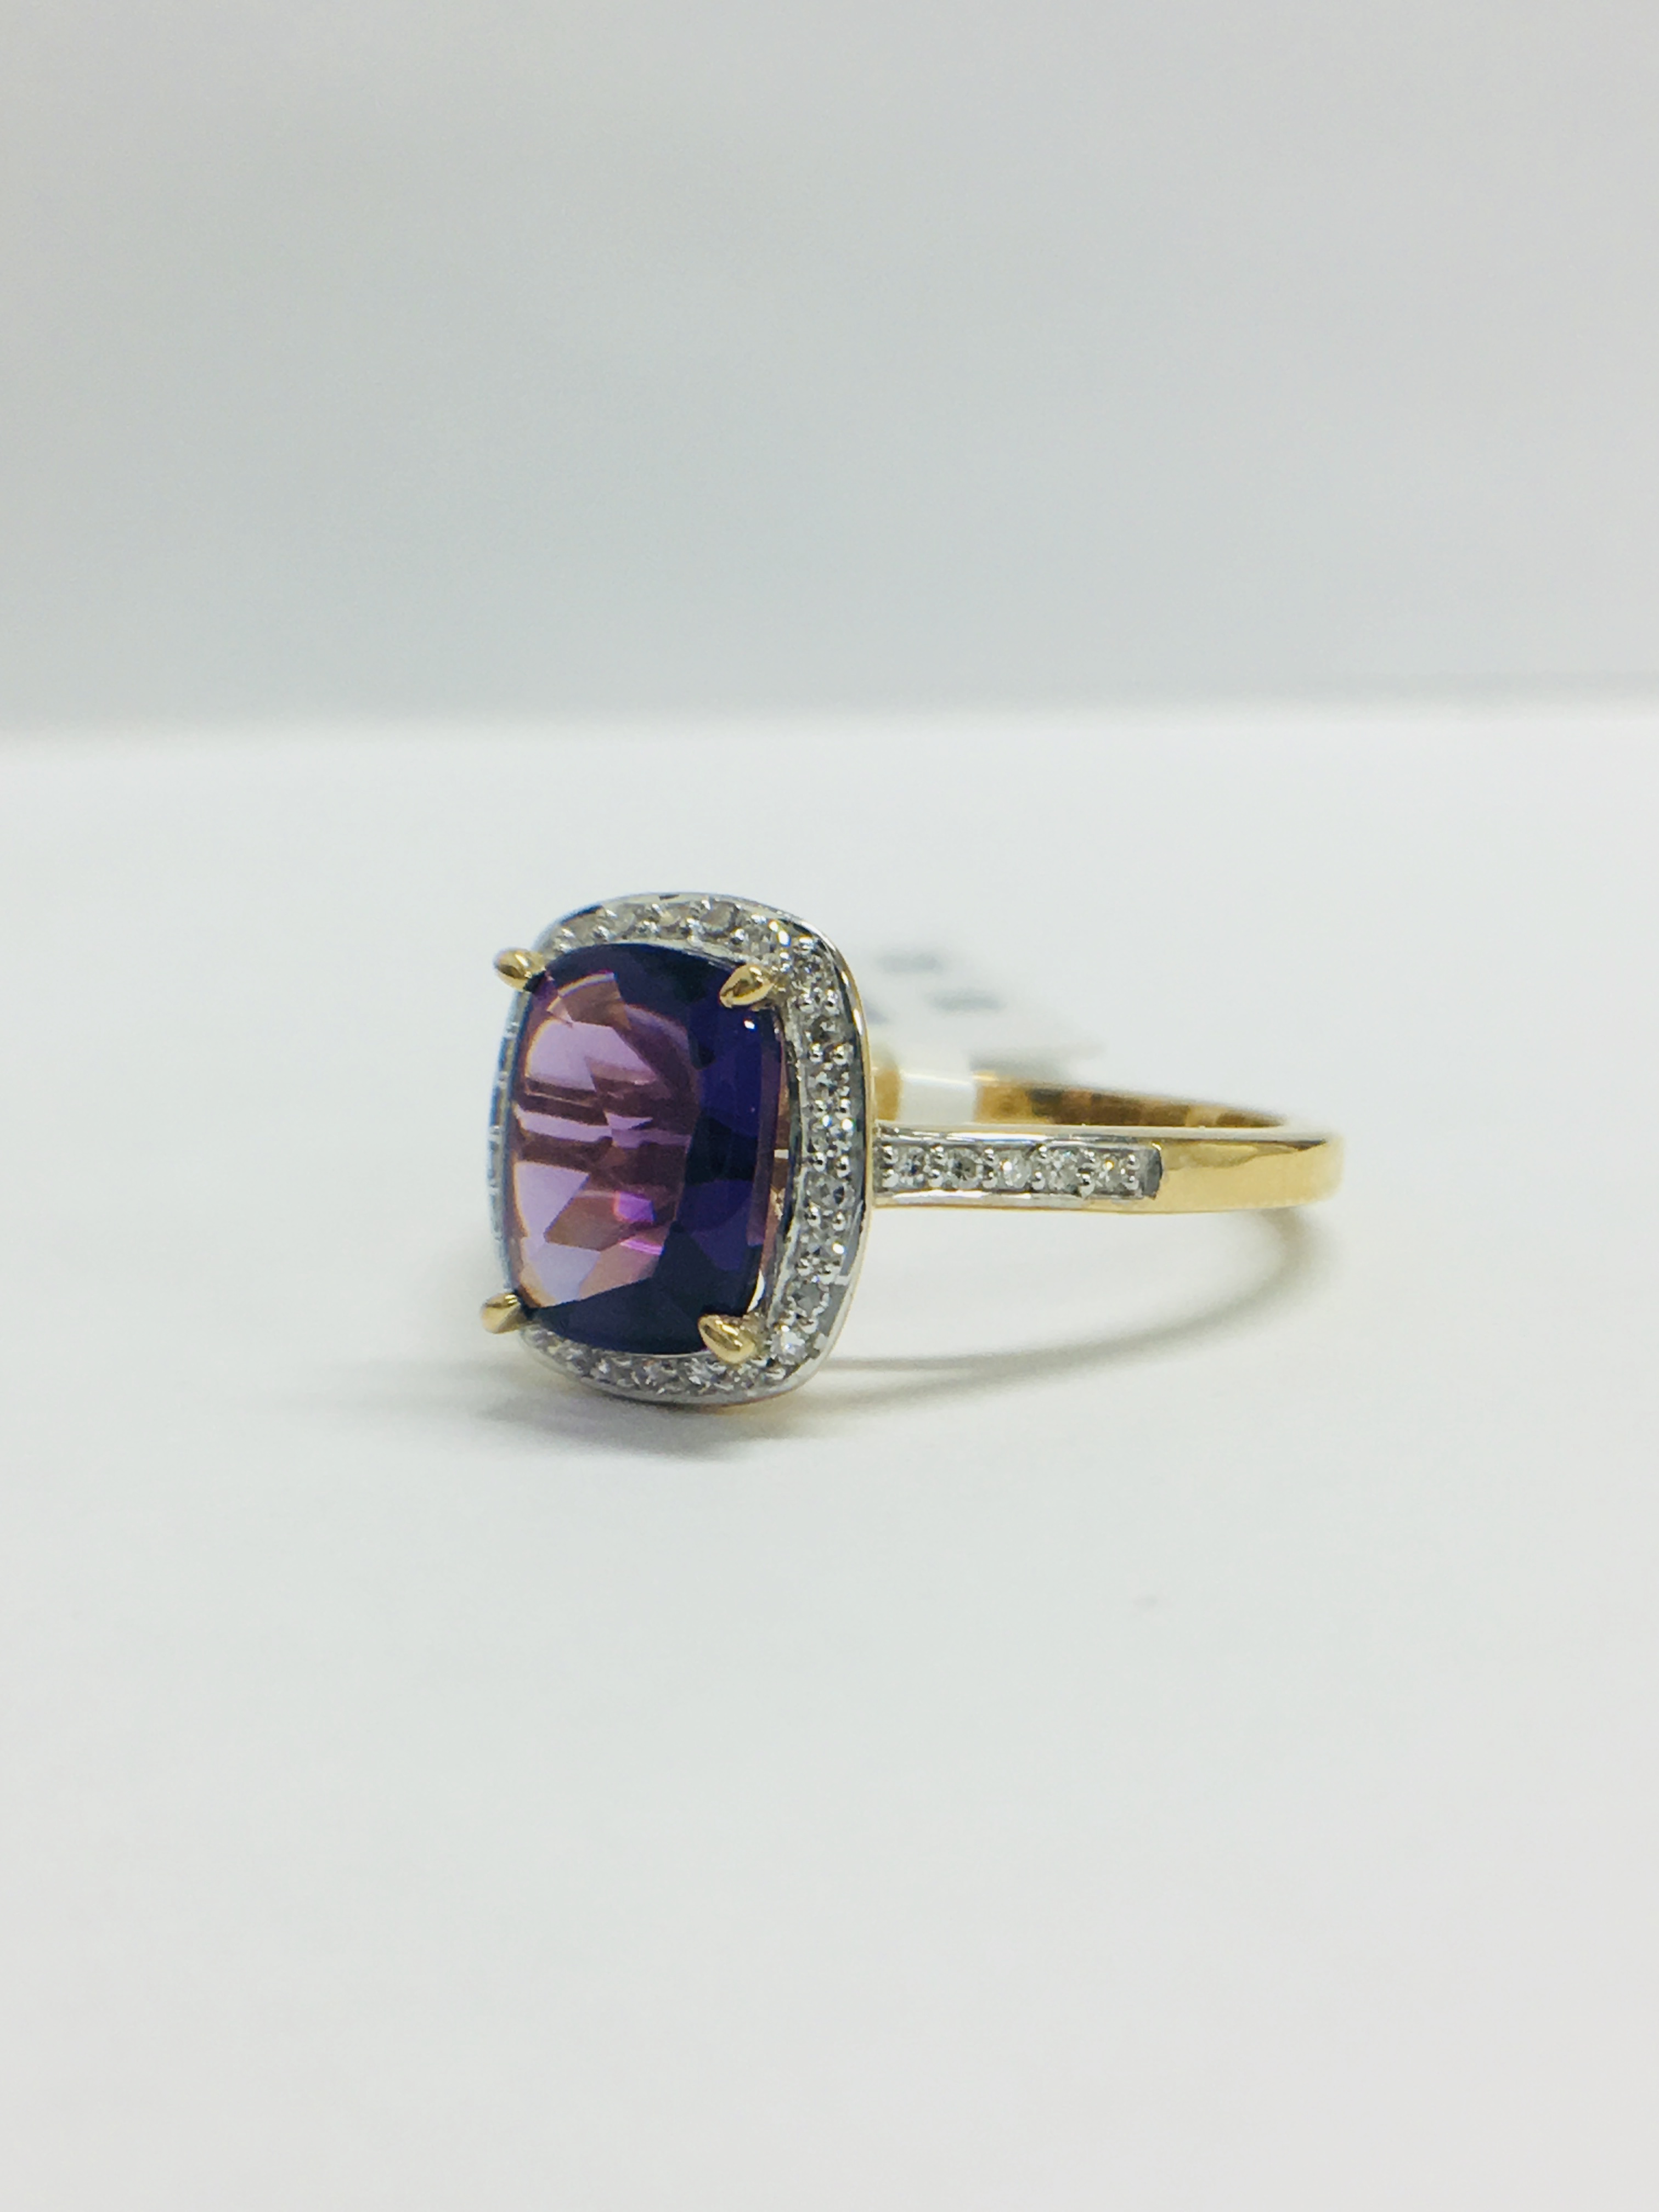 9ct yellow gold Amethyst and diamond ring - Image 2 of 11